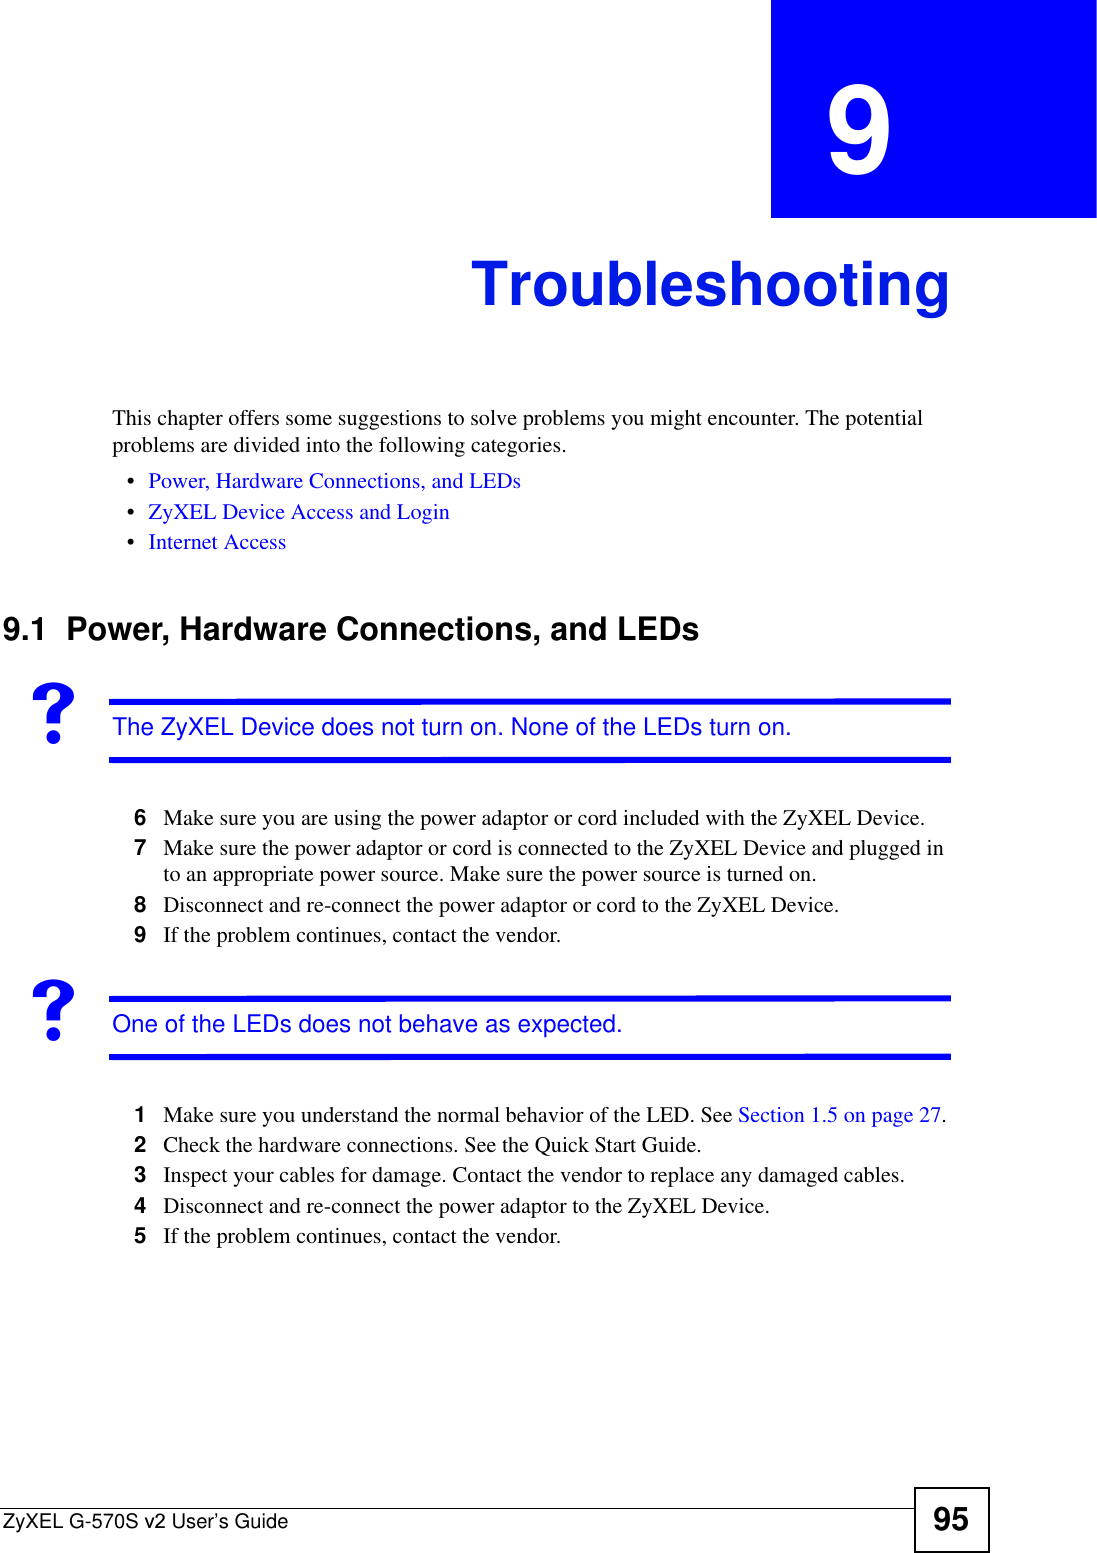 ZyXEL G-570S v2 User’s Guide 95CHAPTER  9 TroubleshootingThis chapter offers some suggestions to solve problems you might encounter. The potential problems are divided into the following categories. •Power, Hardware Connections, and LEDs•ZyXEL Device Access and Login•Internet Access9.1  Power, Hardware Connections, and LEDsVThe ZyXEL Device does not turn on. None of the LEDs turn on.6Make sure you are using the power adaptor or cord included with the ZyXEL Device.7Make sure the power adaptor or cord is connected to the ZyXEL Device and plugged in to an appropriate power source. Make sure the power source is turned on.8Disconnect and re-connect the power adaptor or cord to the ZyXEL Device.9If the problem continues, contact the vendor.VOne of the LEDs does not behave as expected.1Make sure you understand the normal behavior of the LED. See Section 1.5 on page 27.2Check the hardware connections. See the Quick Start Guide.3Inspect your cables for damage. Contact the vendor to replace any damaged cables.4Disconnect and re-connect the power adaptor to the ZyXEL Device. 5If the problem continues, contact the vendor.